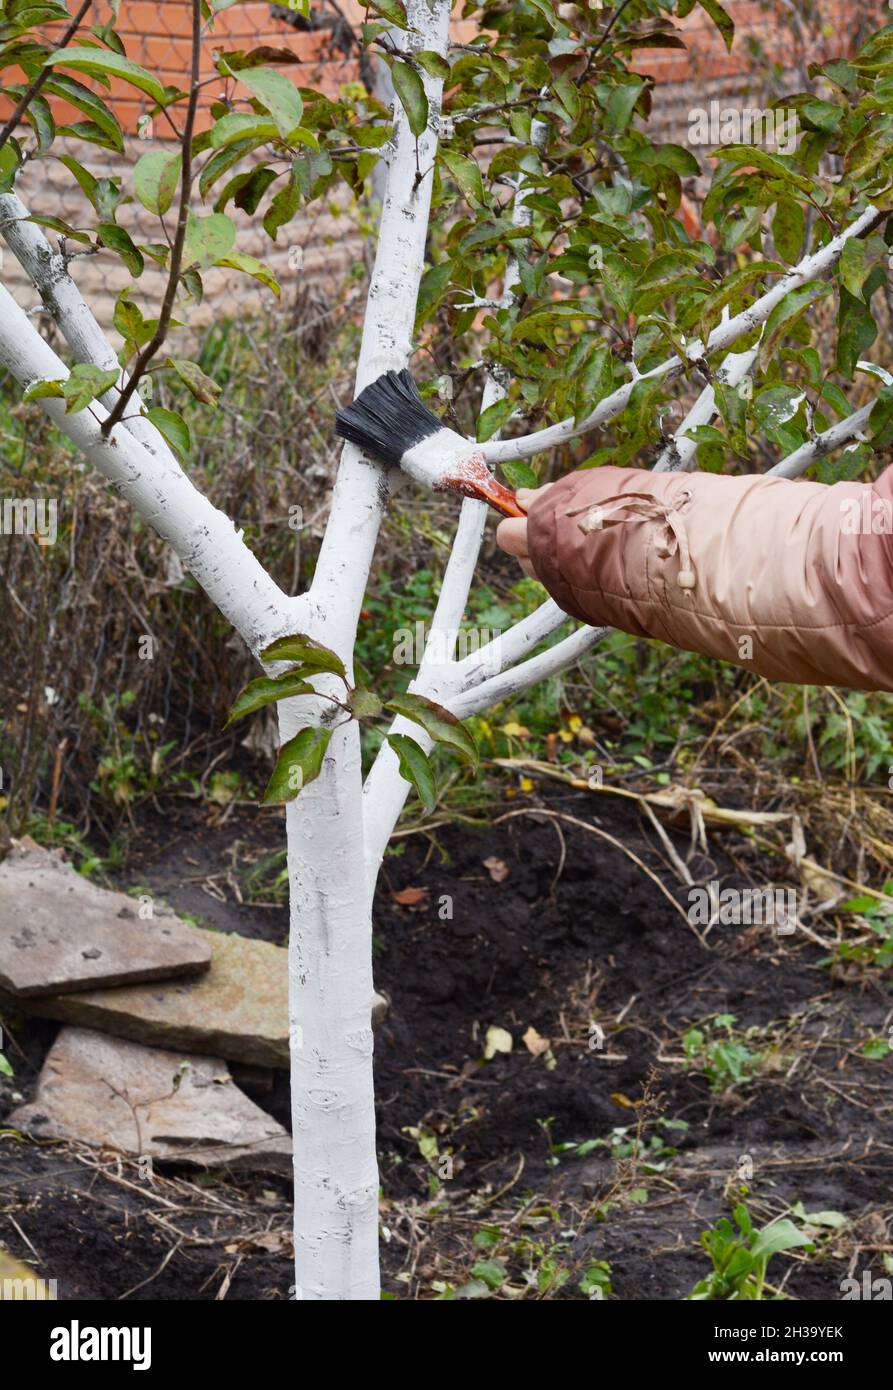 A gardener is whitewashing a fruit tree. White color prevents the bark from heating too much under the spring sun and this prevents cracking. Stock Photo